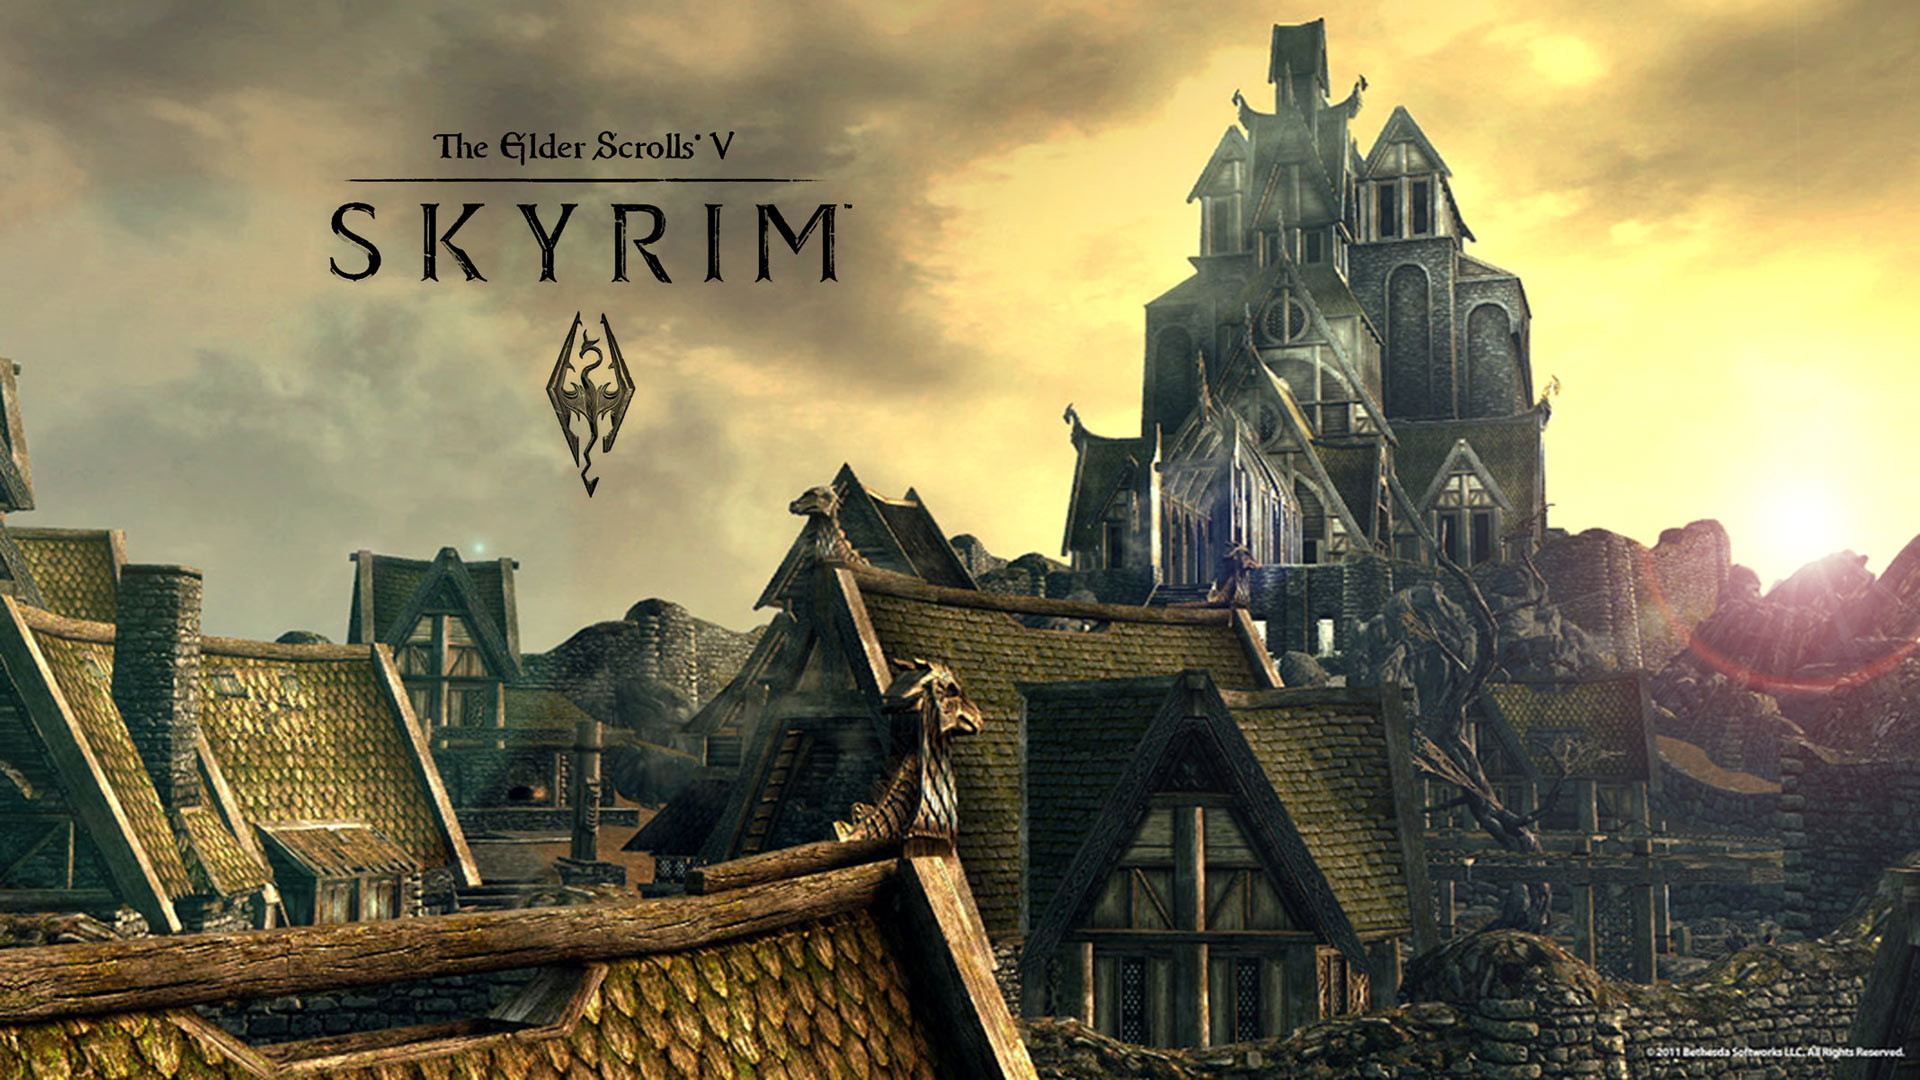 1920x1080 Micketo images Skyrim HD wallpaper and background photos